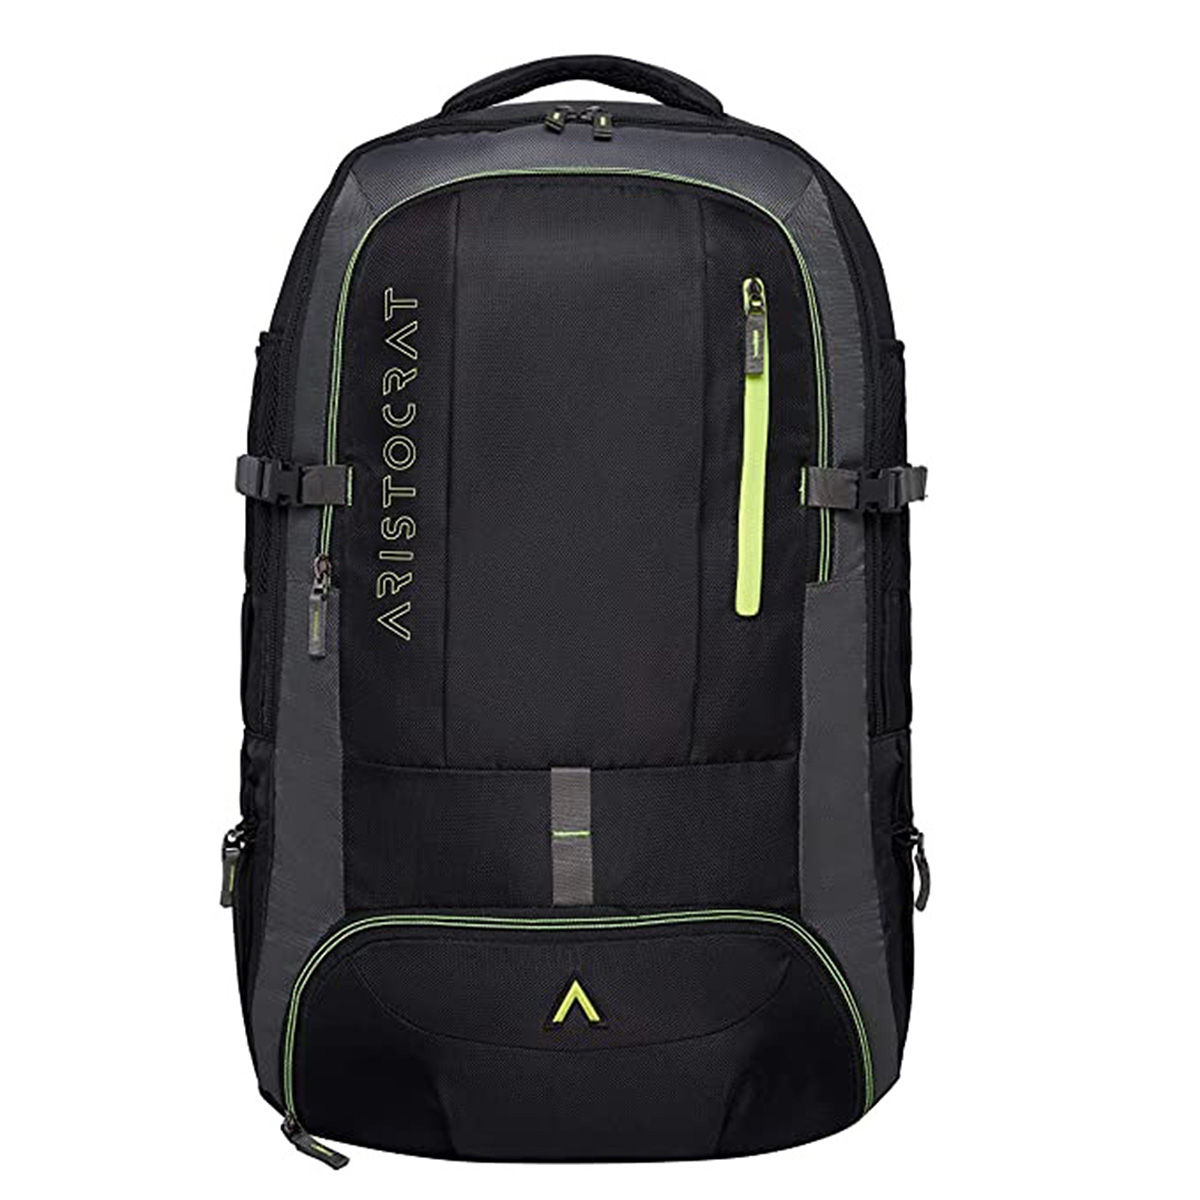 Aristocrat Hunk 40L Rucksack E Navy Blue in Nagpur at best price by Arihant  Bag House - Justdial